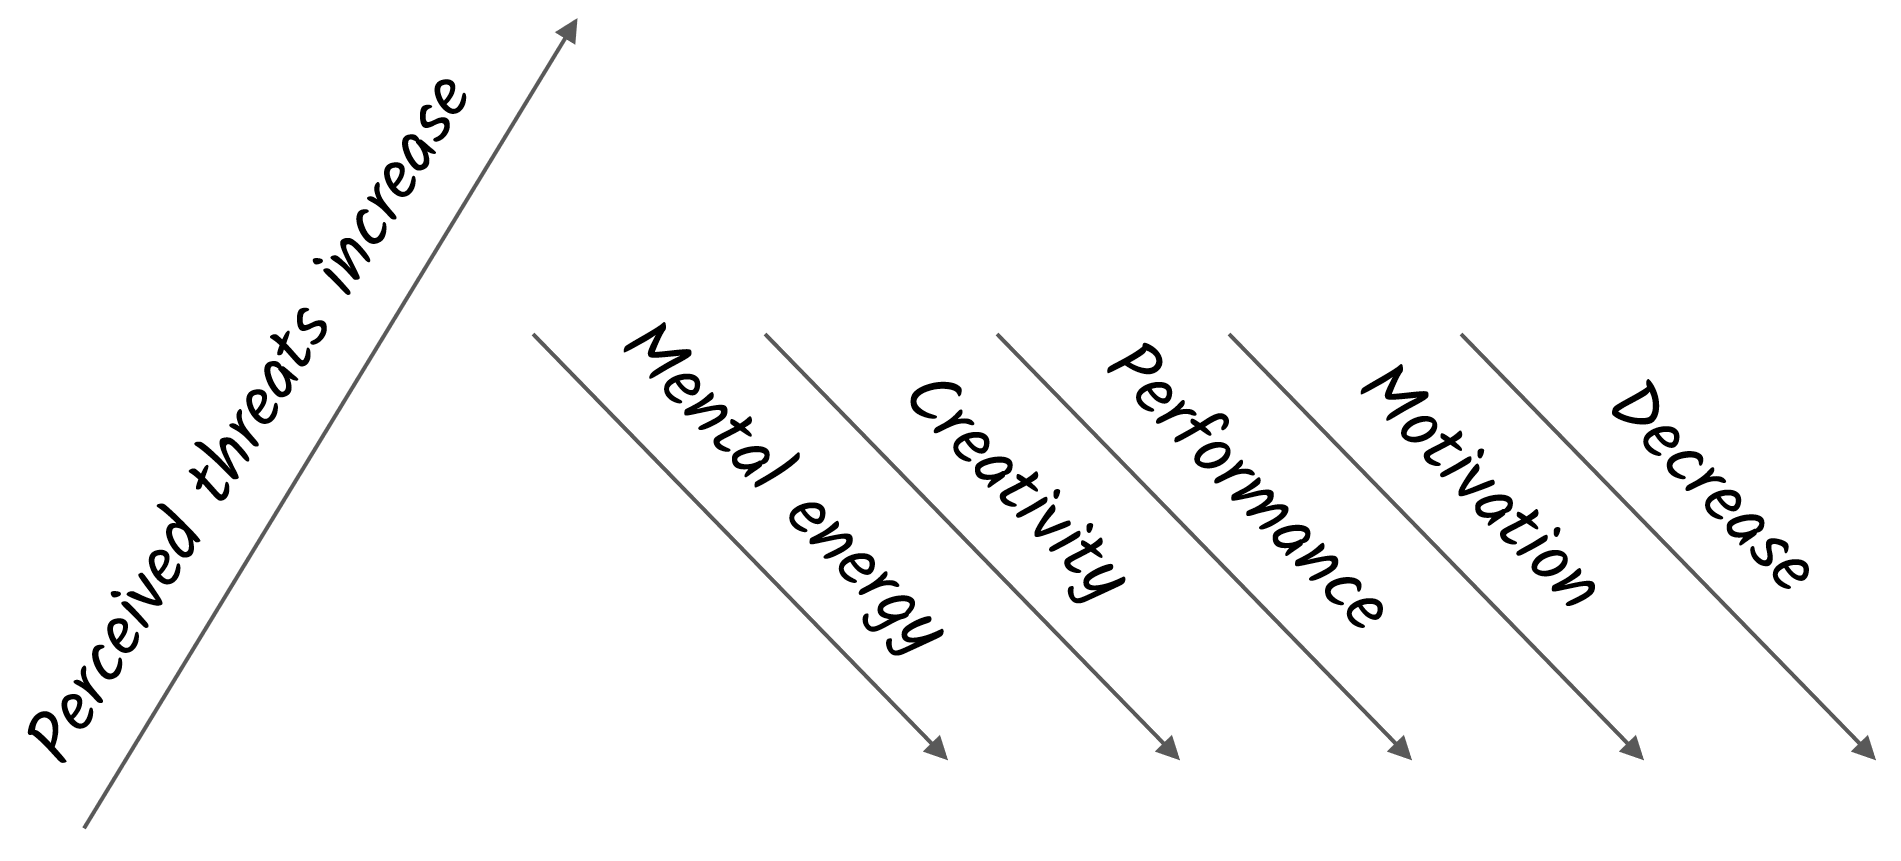 Illustration Showing Correlation Between Perceived Threats and Low Performance